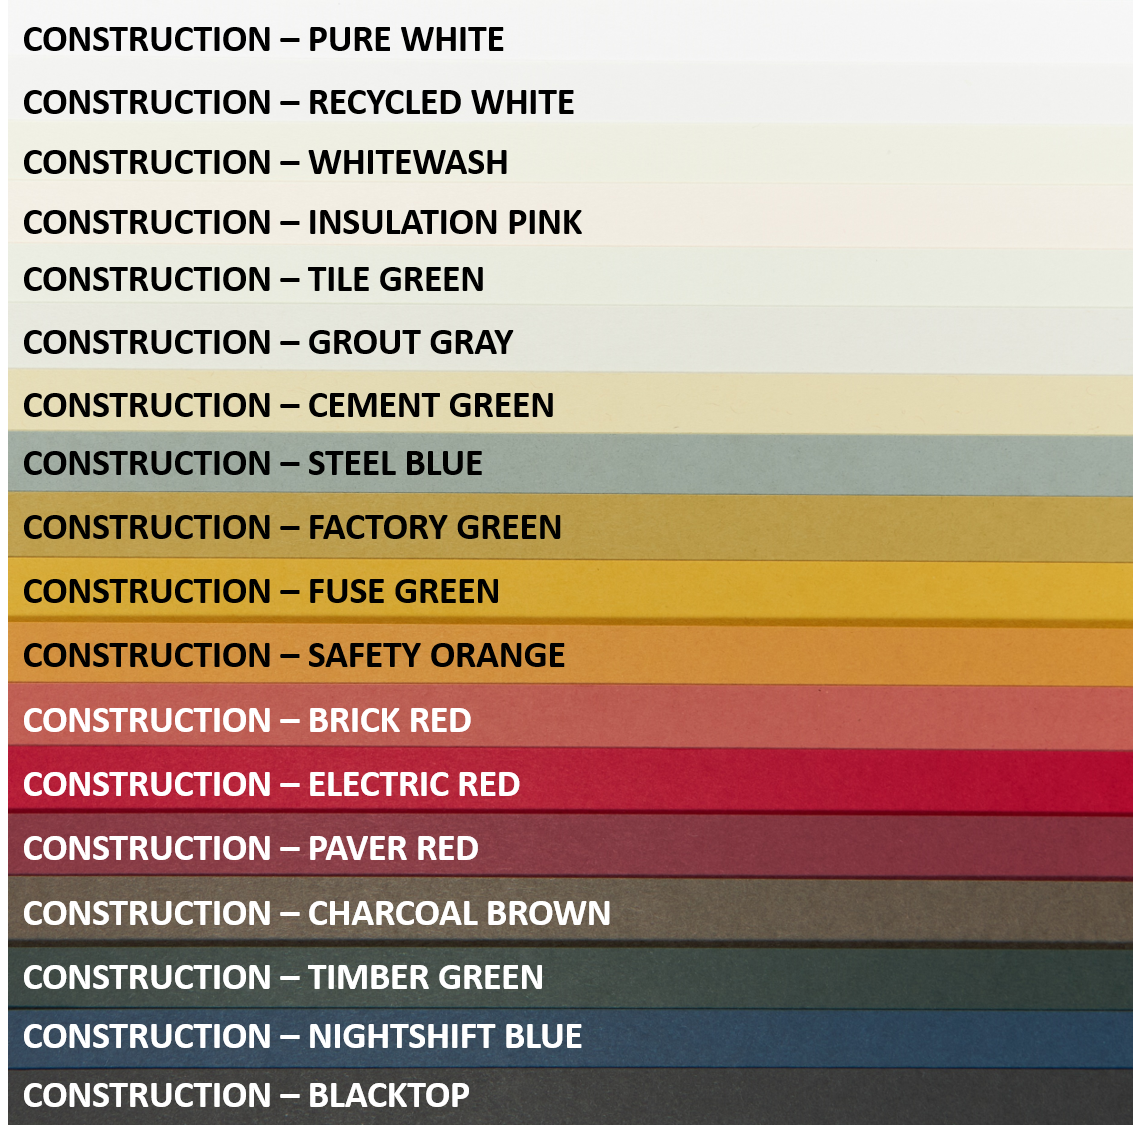 Paver Red Cardstock (Construction, Cover Weight)